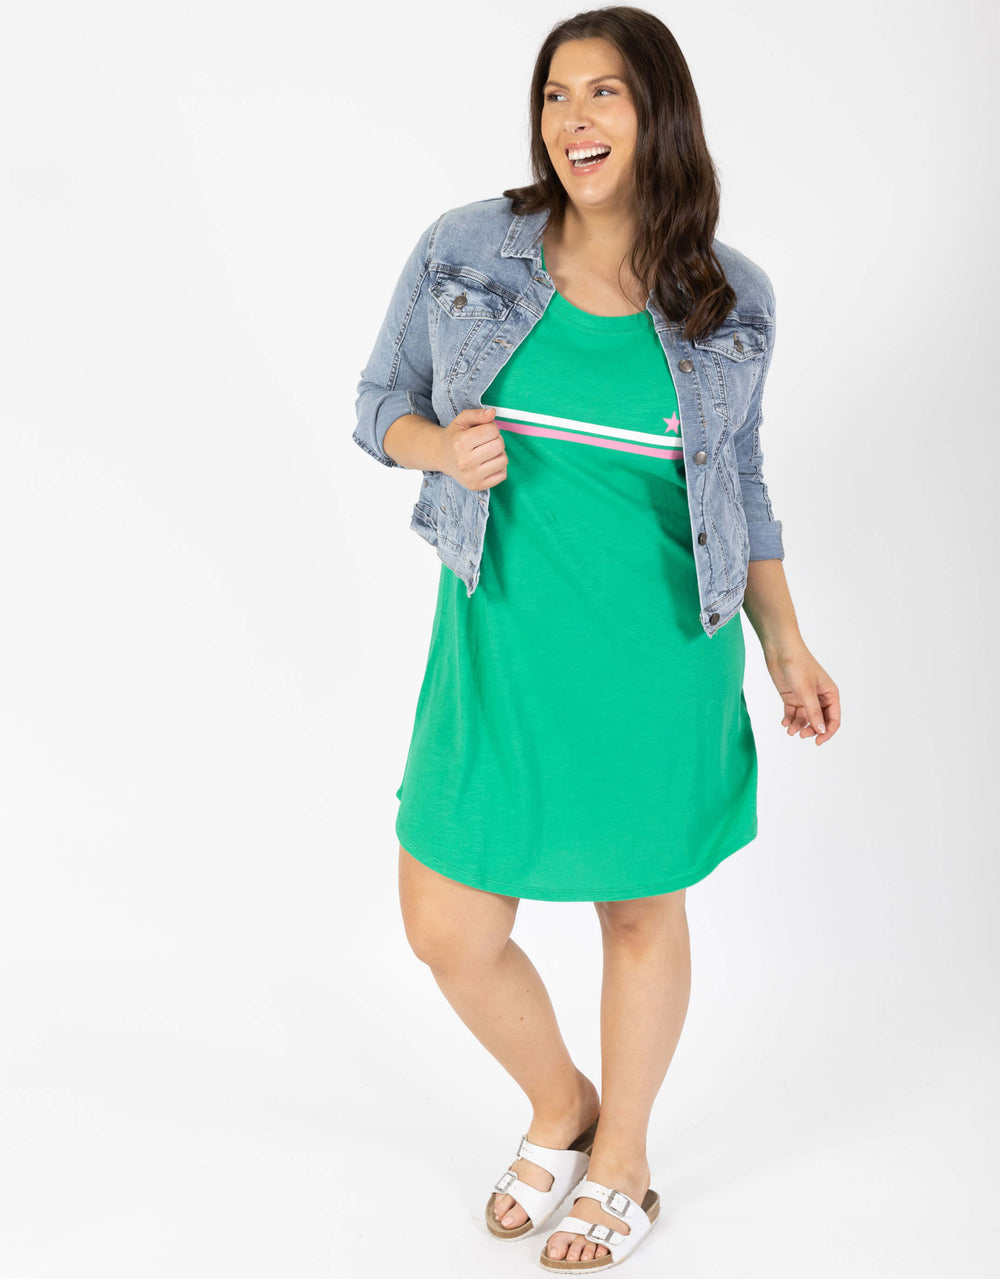 white-and-co-label-beach-club-dress-green-plus-size-clothing